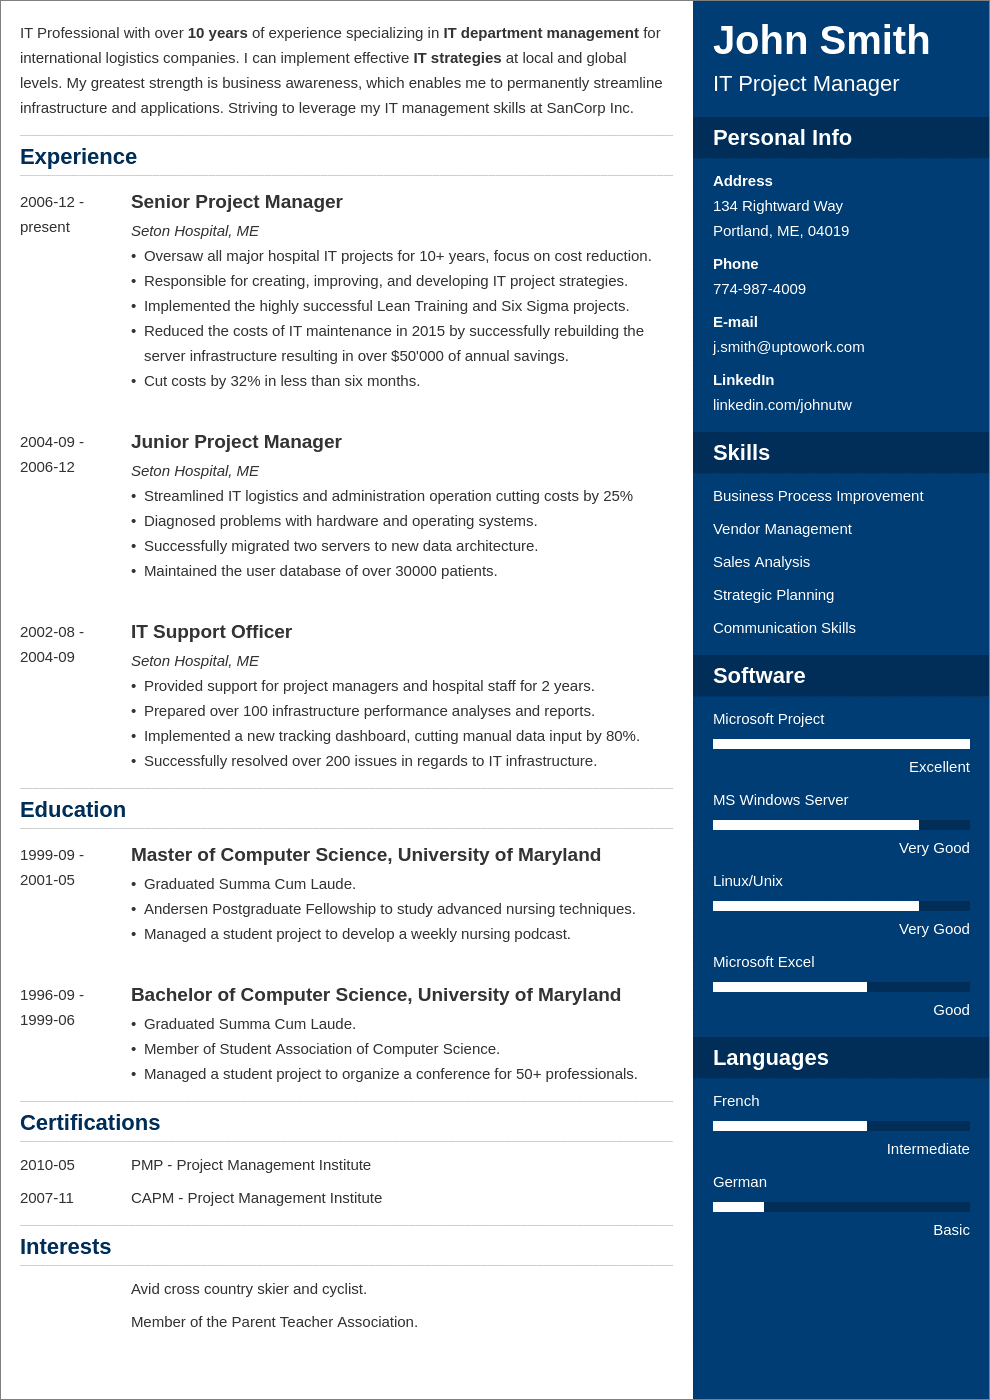 Enfold resume example template